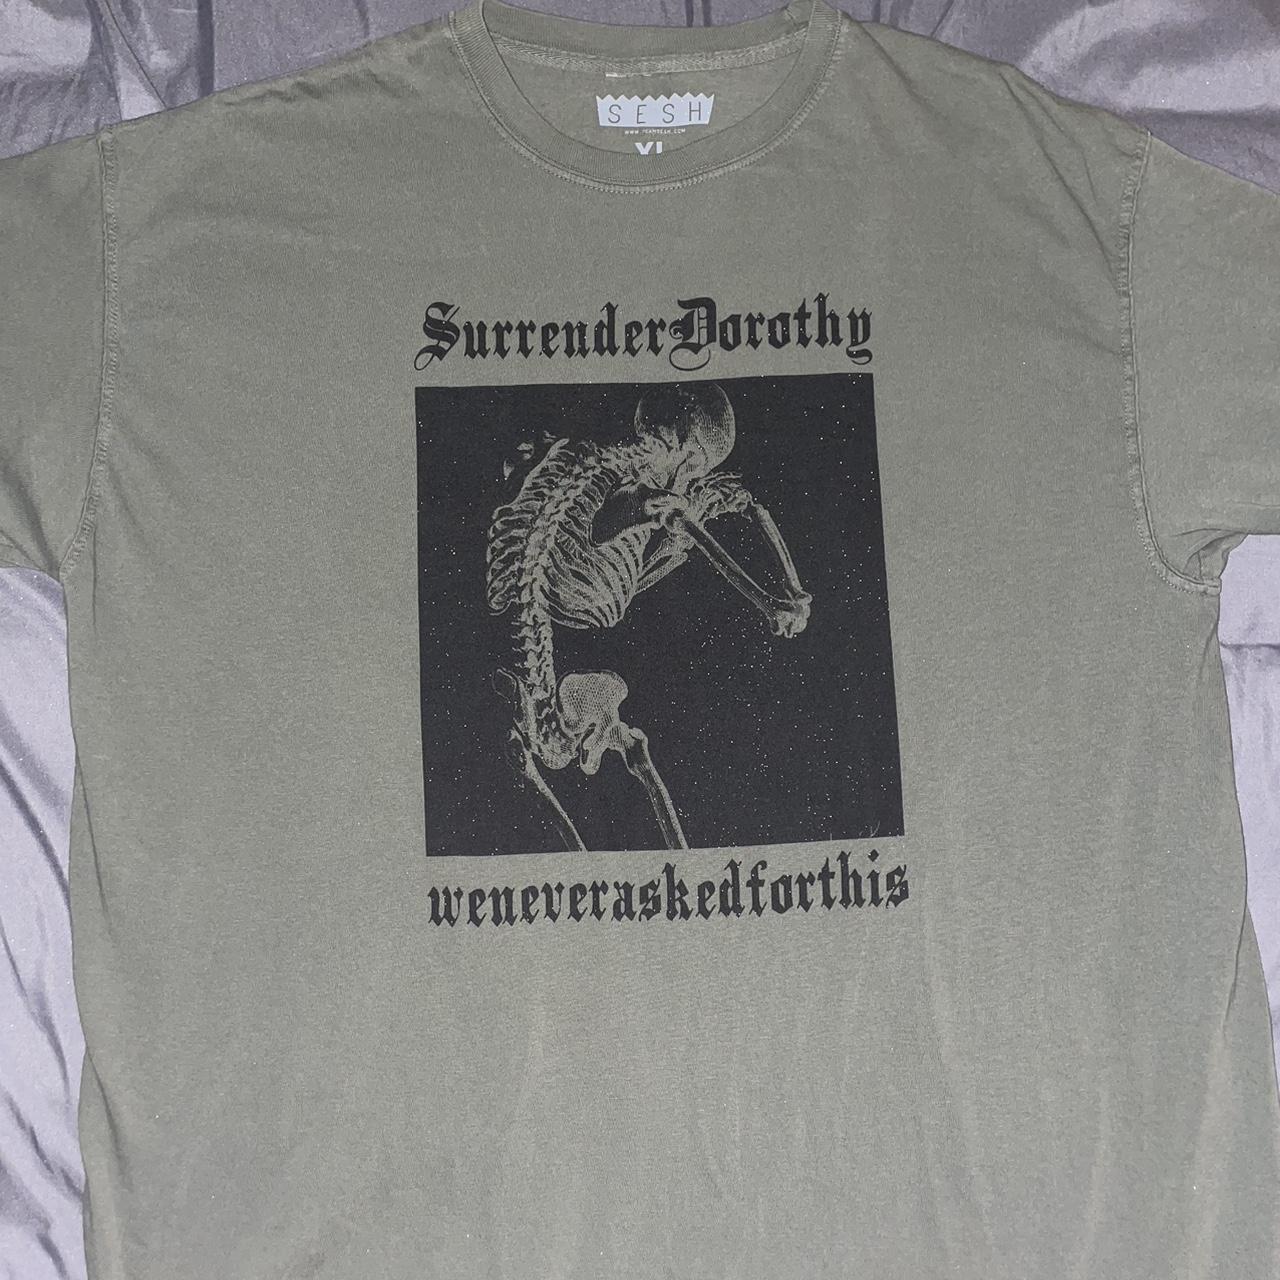 item listed by surrenderzachary